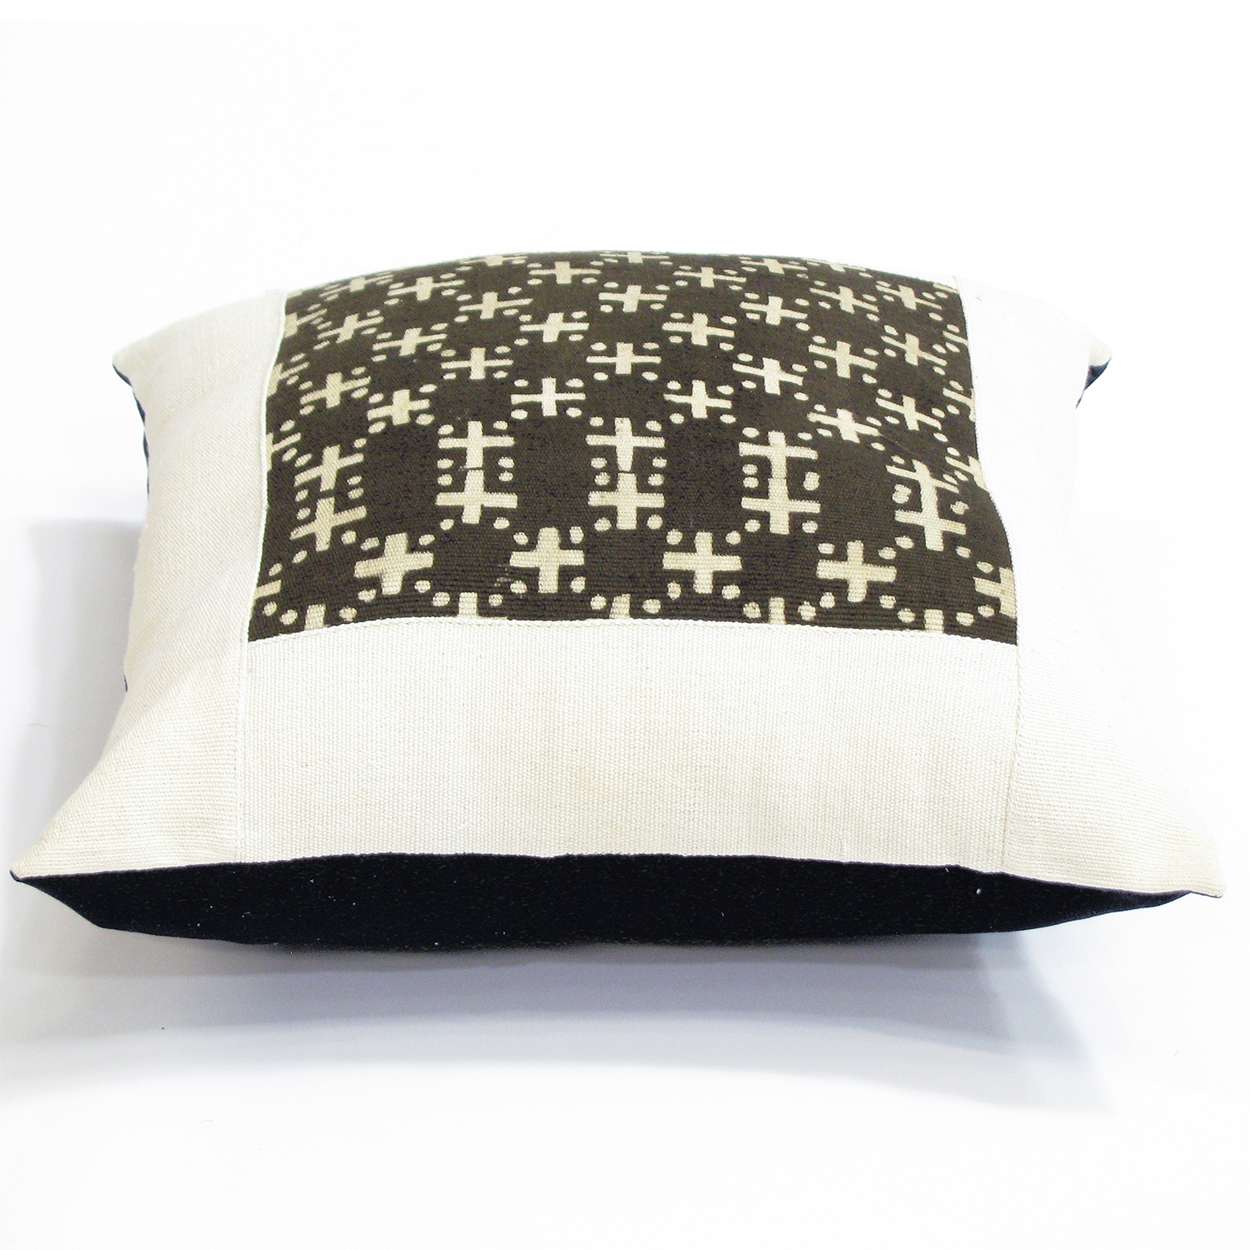 191005 - Hand Woven African 16 inch Pillow - Web of Circles - White